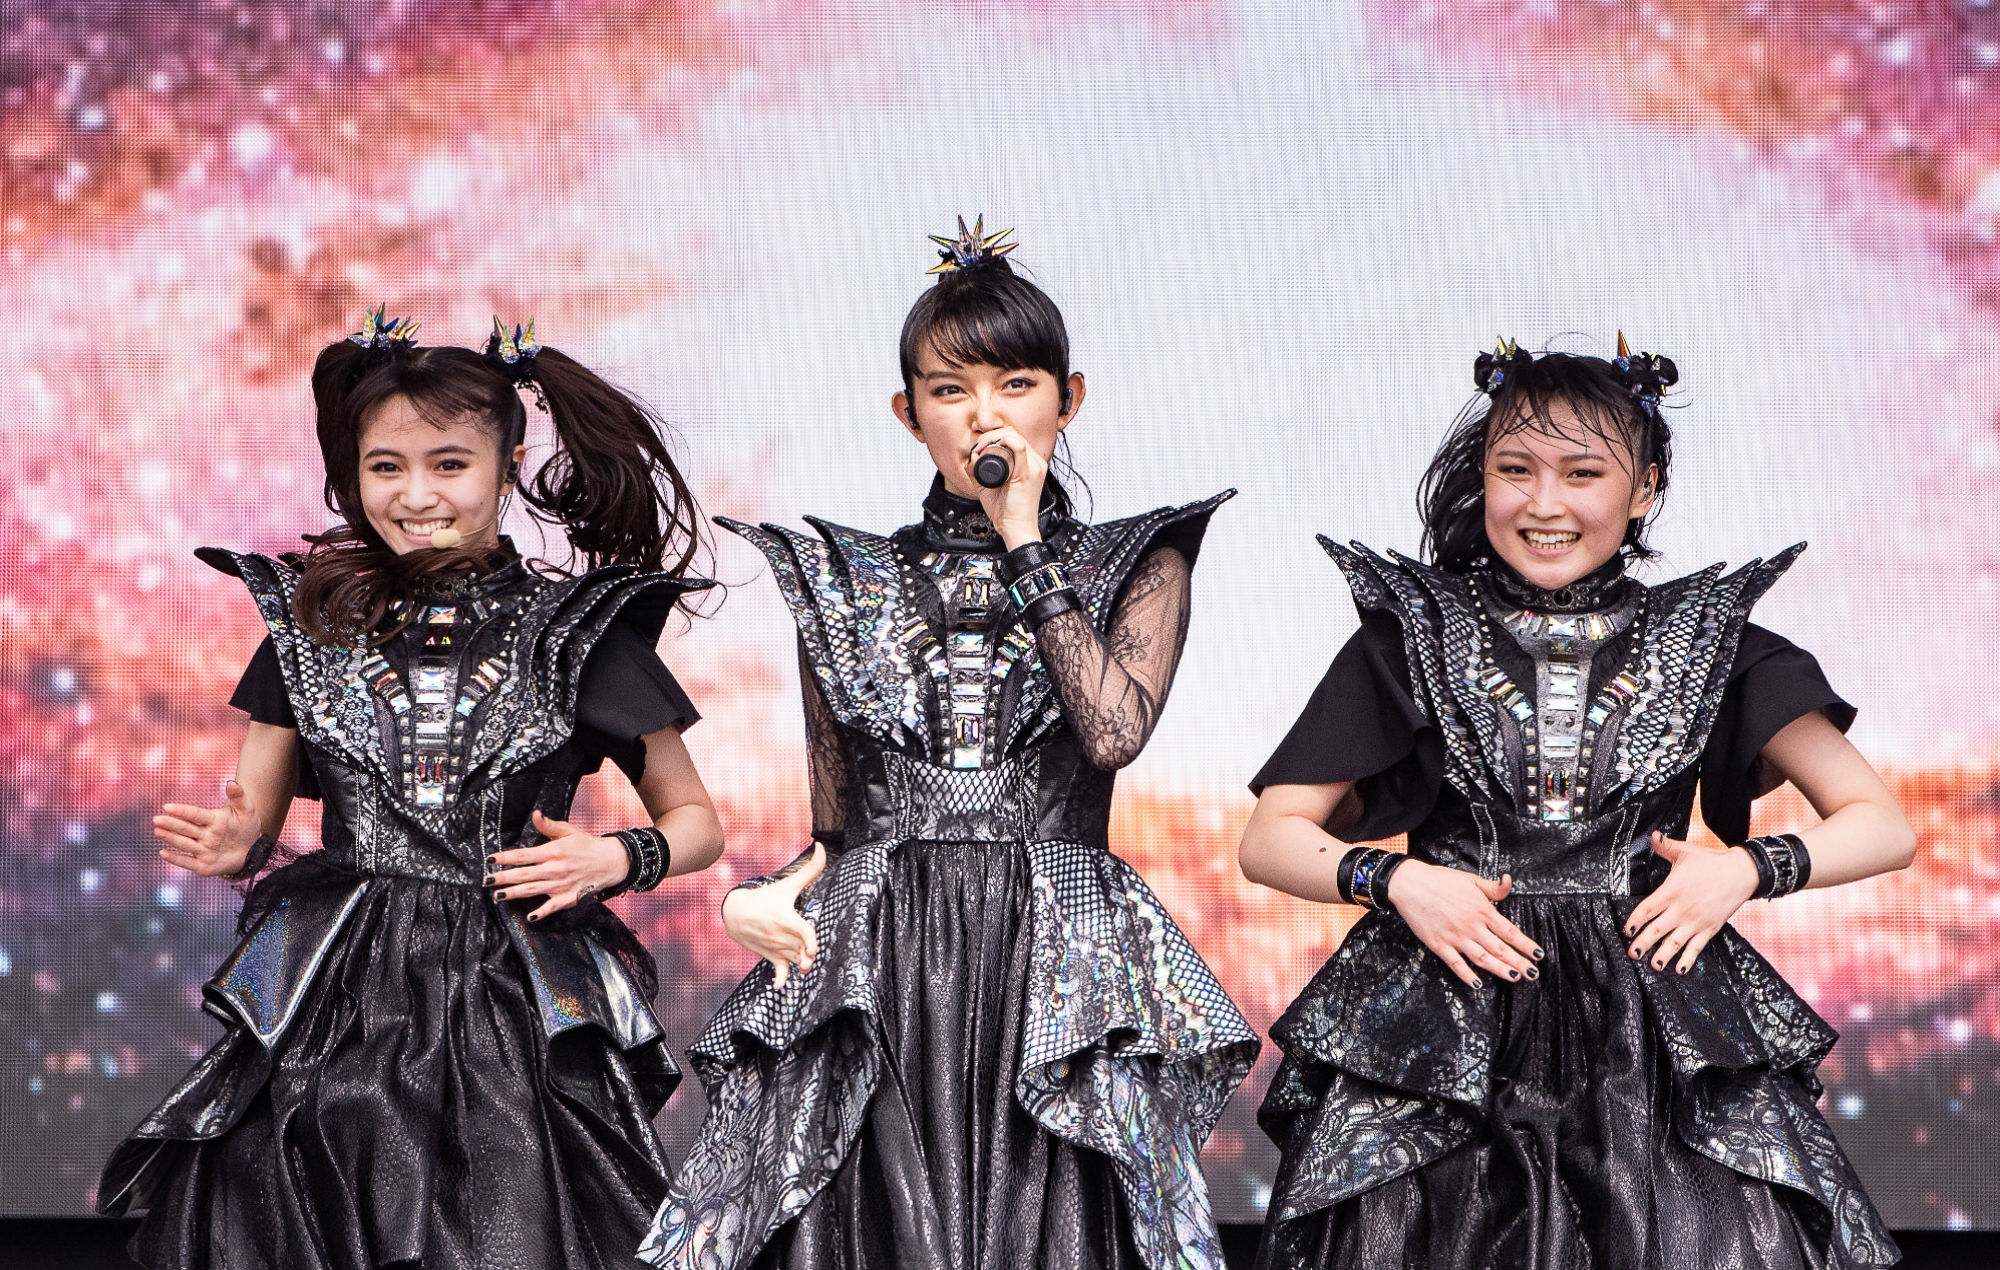 Babymetal annunciato il live "Stay Home Stay Metal Live At Home" in